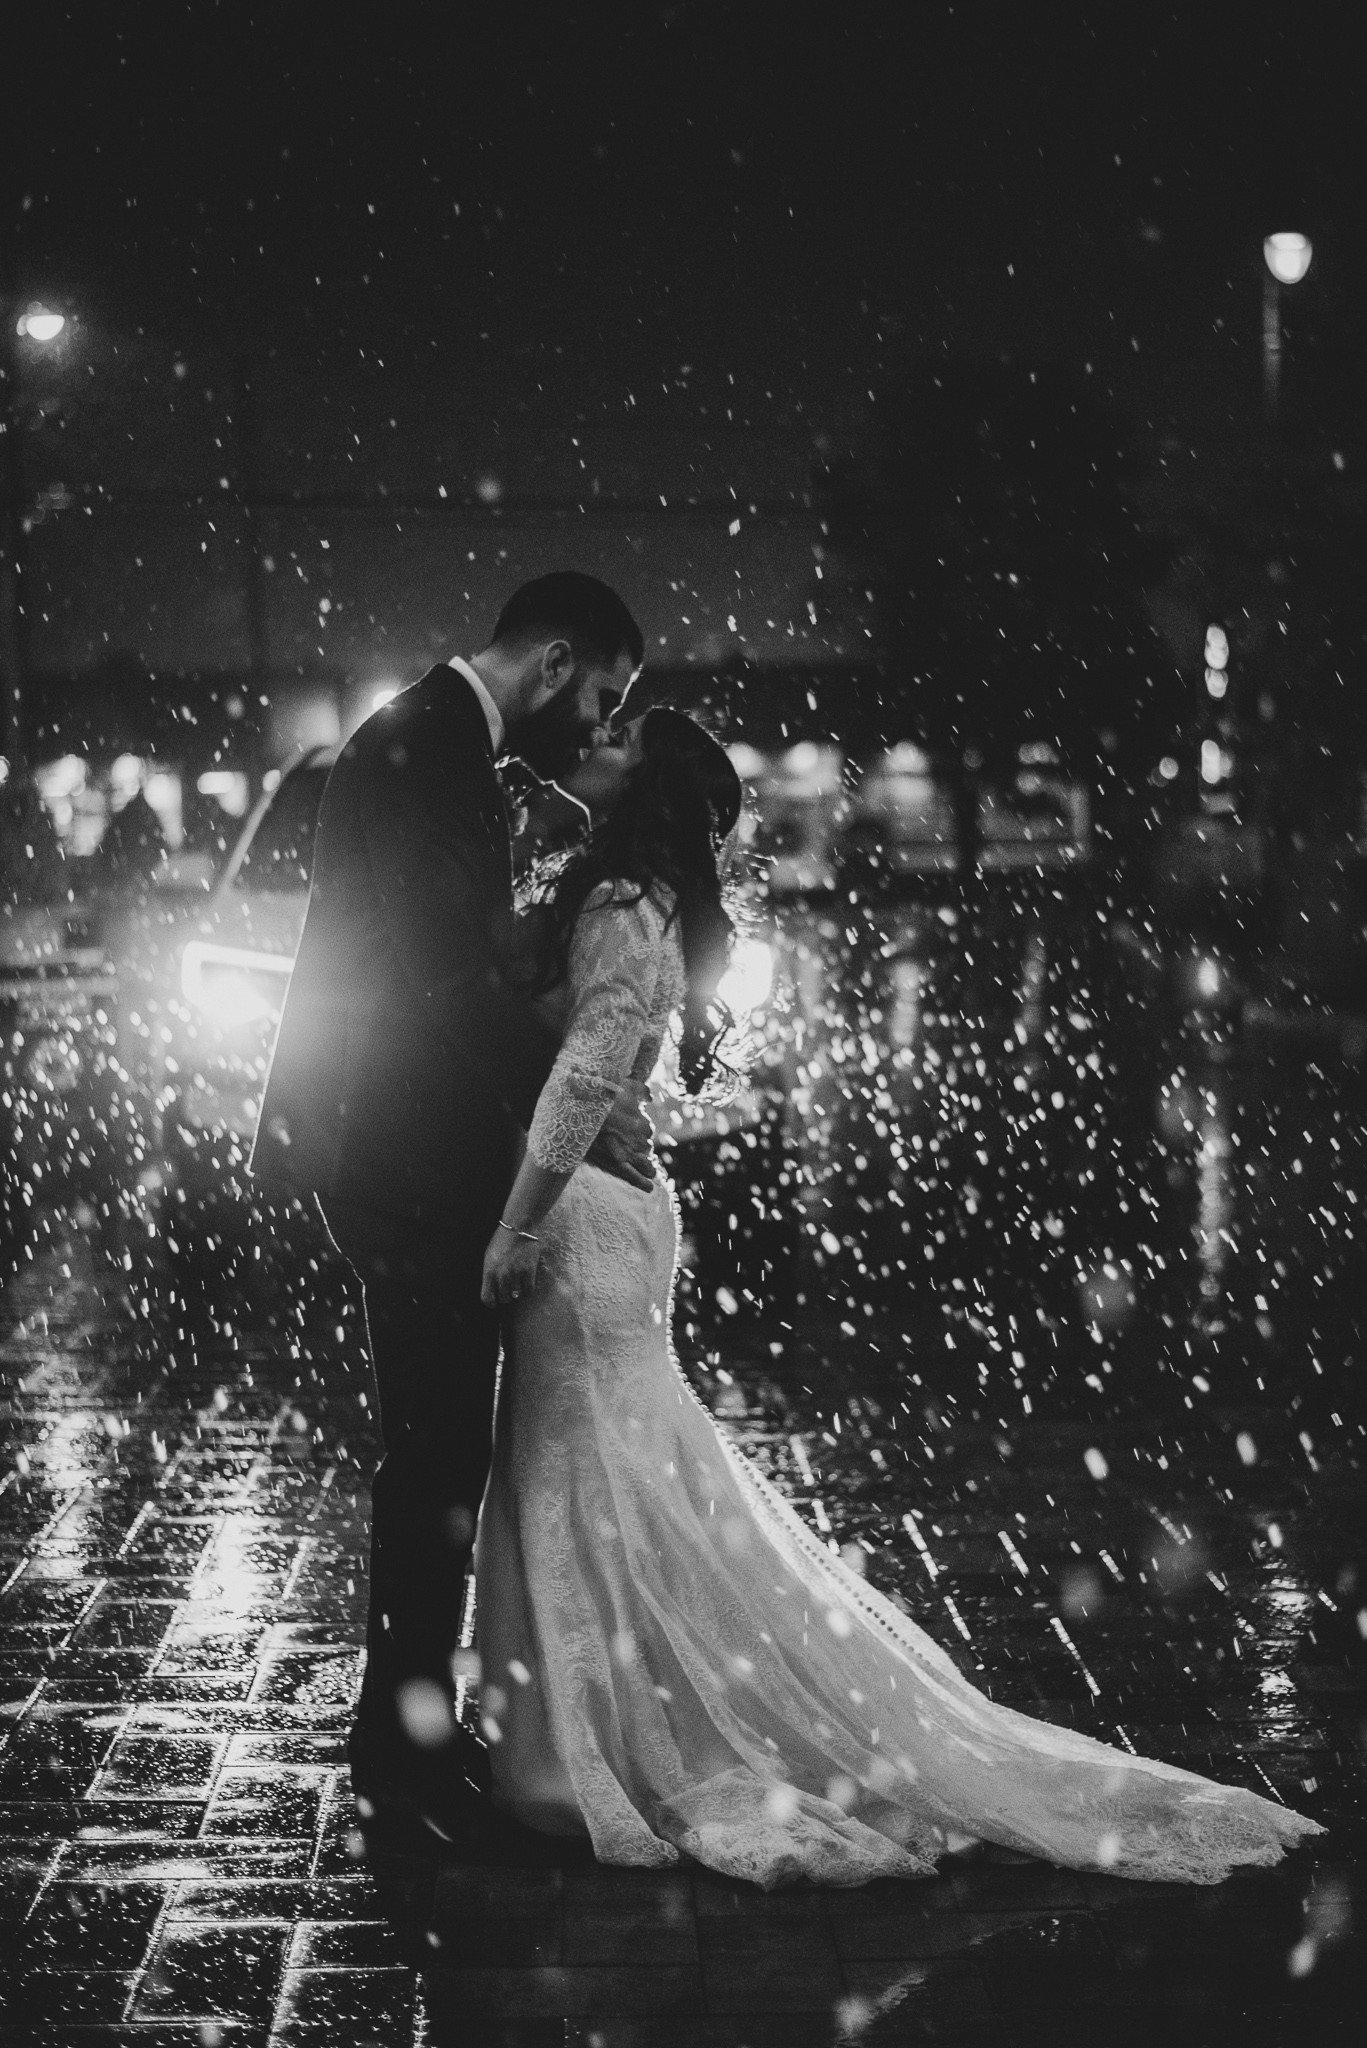 Night time wedding photo of a bride and groom in the snow